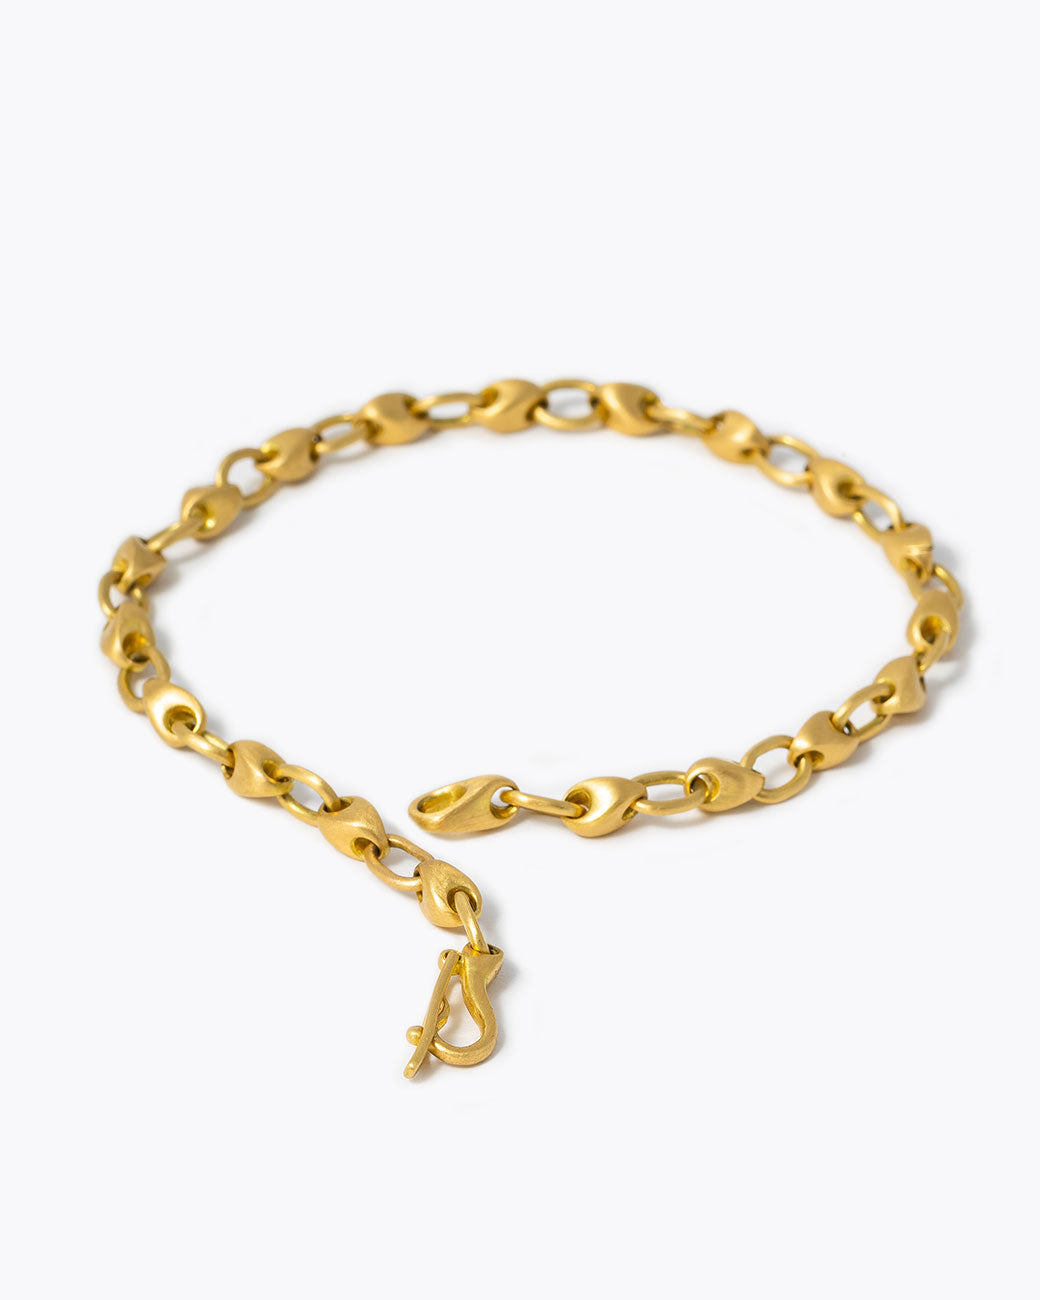 A 18k yellow gold handcrafted bracelet by Marian Maurer. The links alternate between ovals and pebble shapes, shown unclasped.